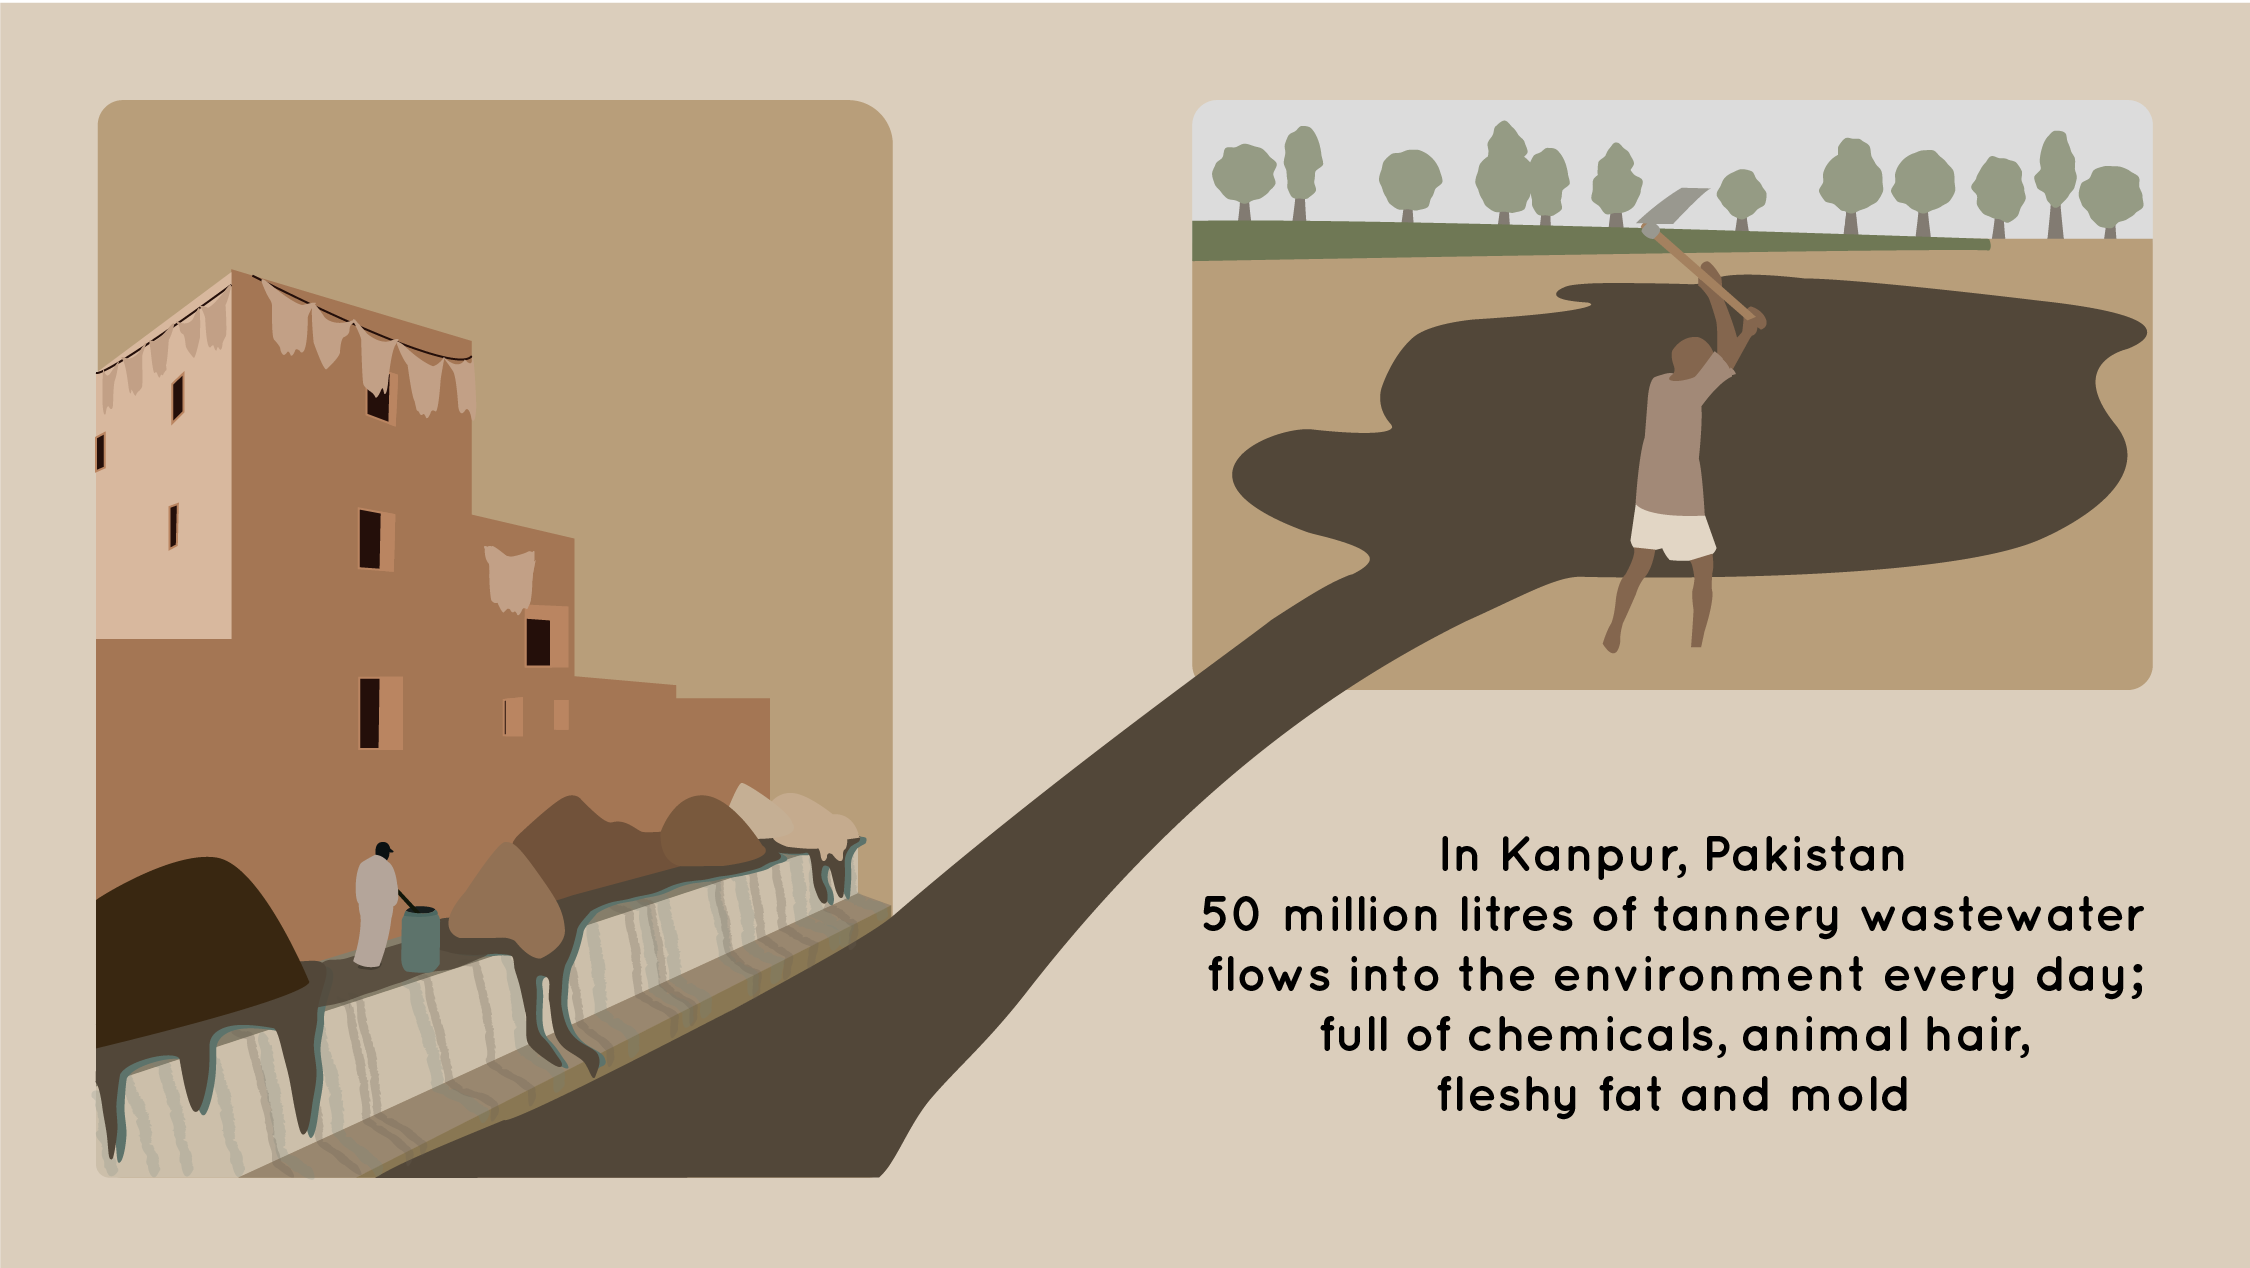 Daily tannery wastewater pollution River Ganges Kanpur Pakistan